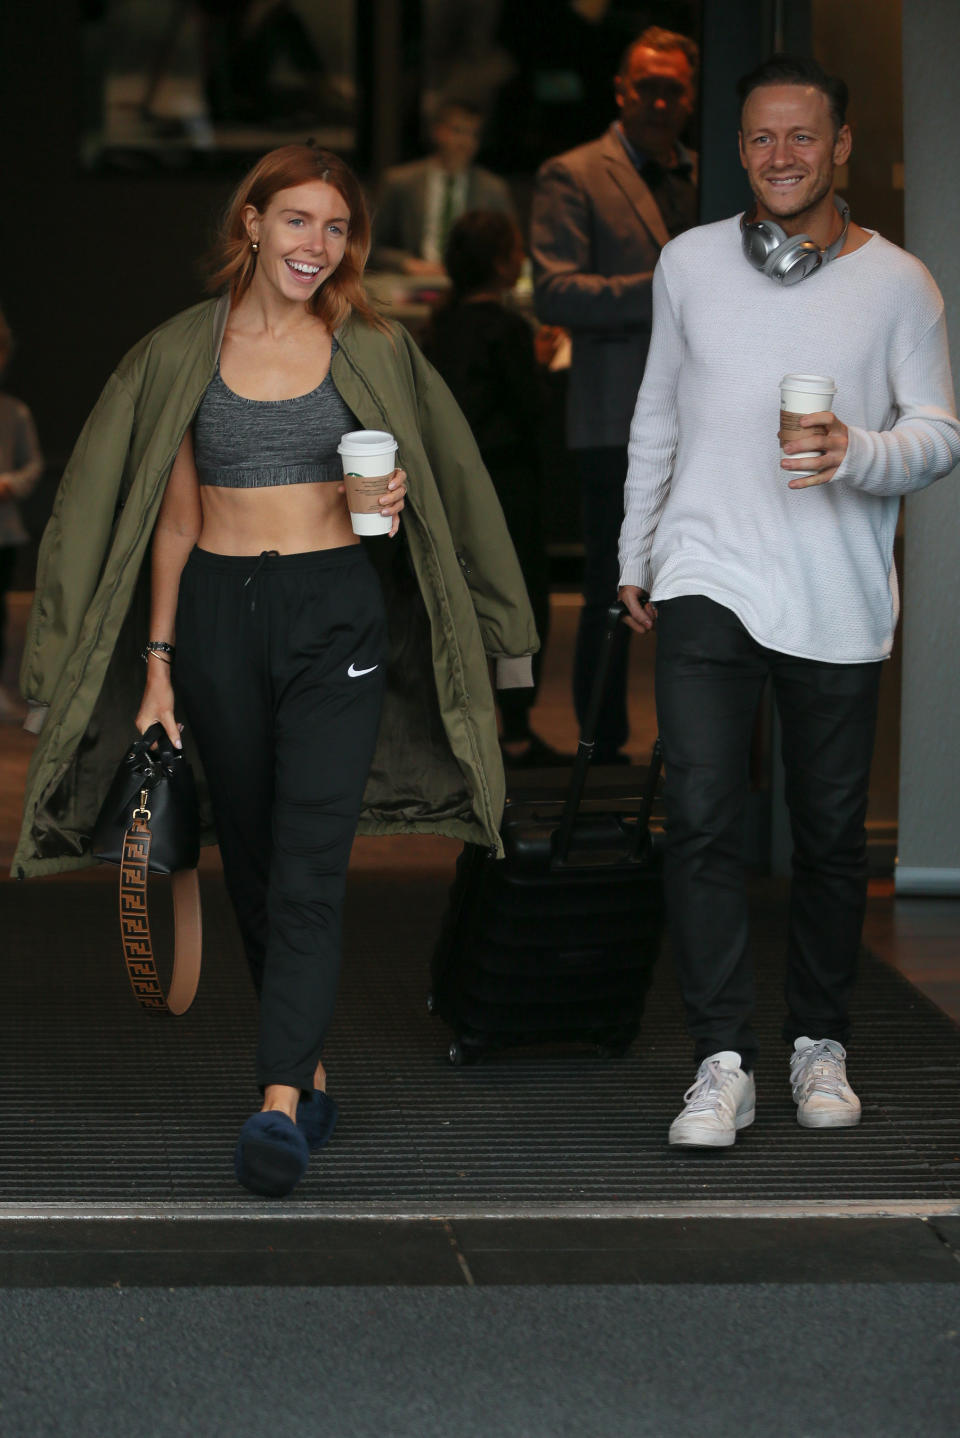 Strictly Come Dancing's Stacey Dooley and Kevin Clifton leave the hotel on October 06, 2018 in London, England